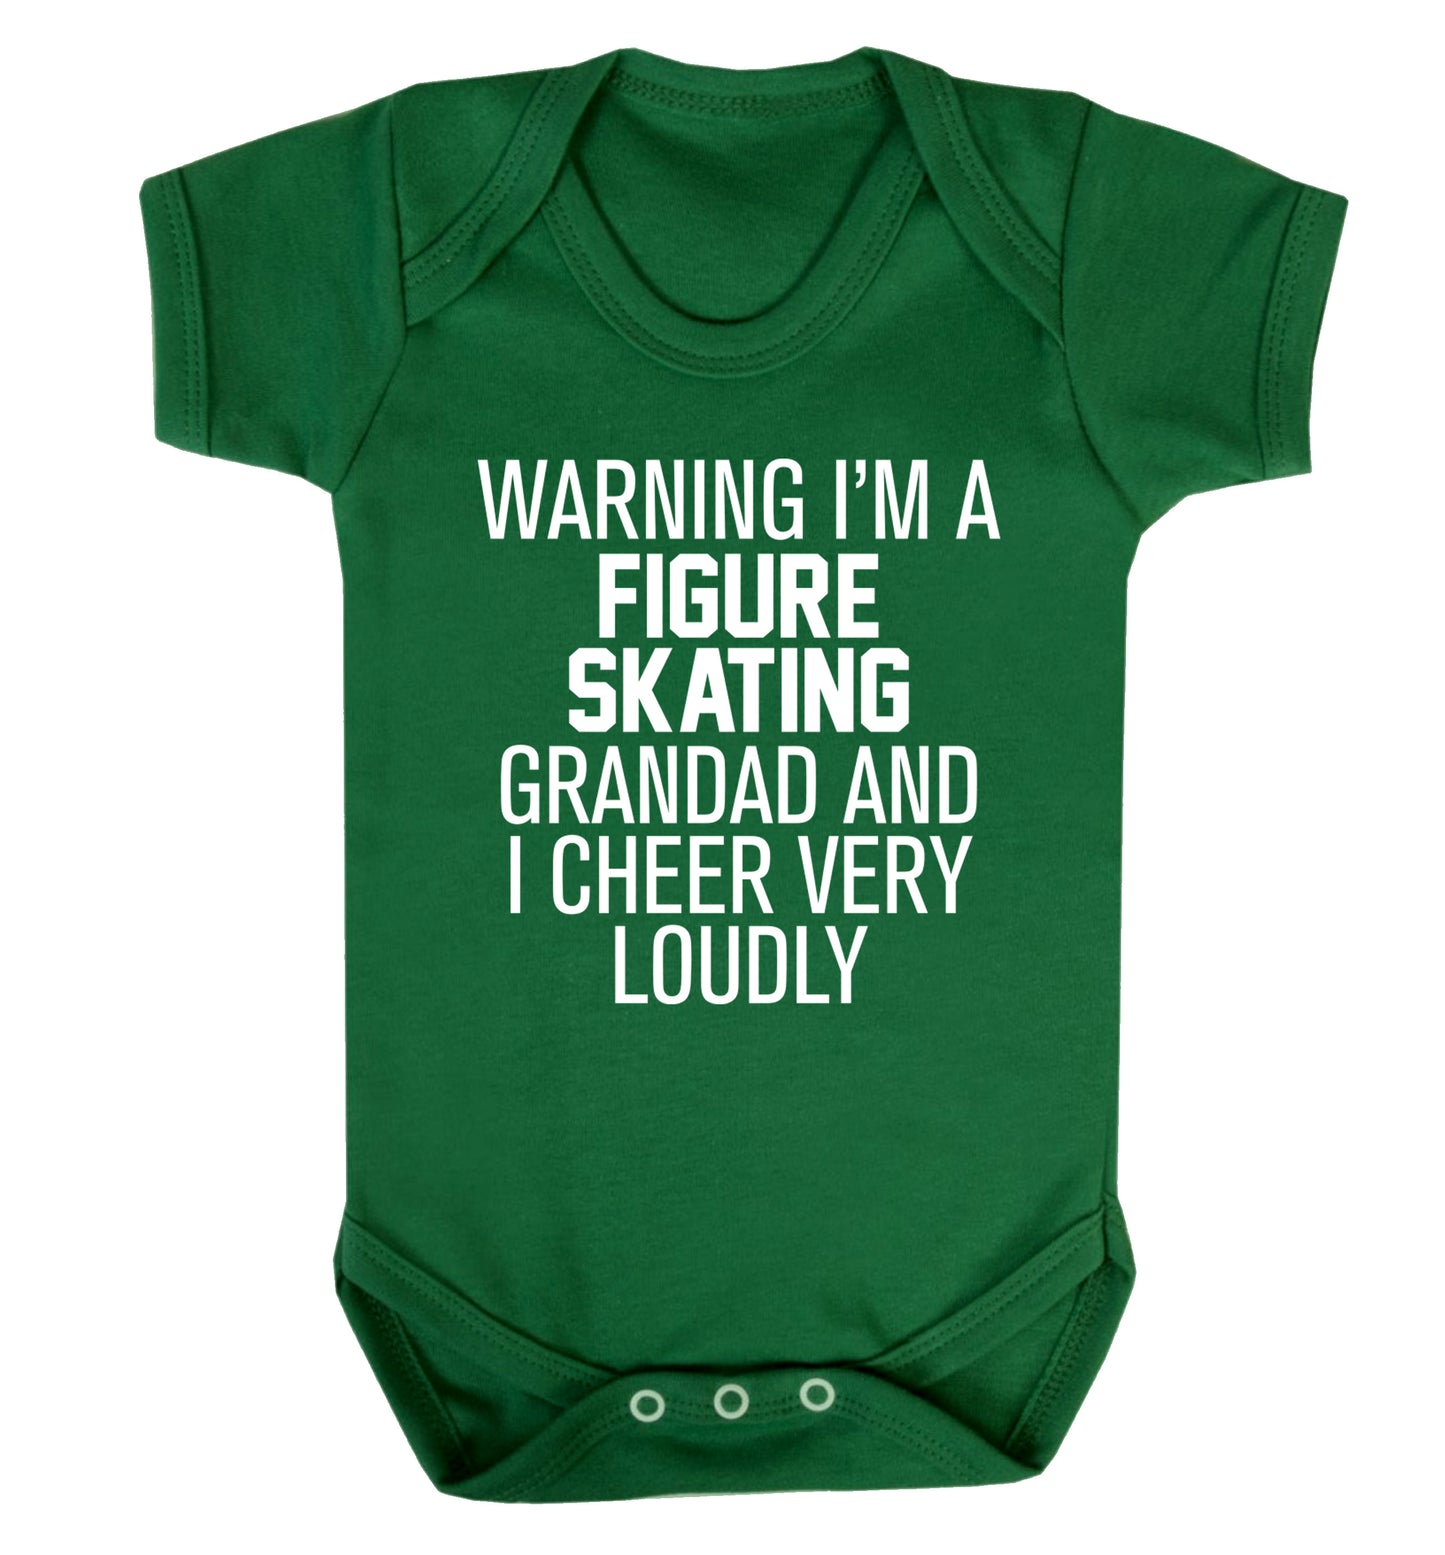 Warning I'm a figure skating grandad and I cheer very loudly Baby Vest green 18-24 months